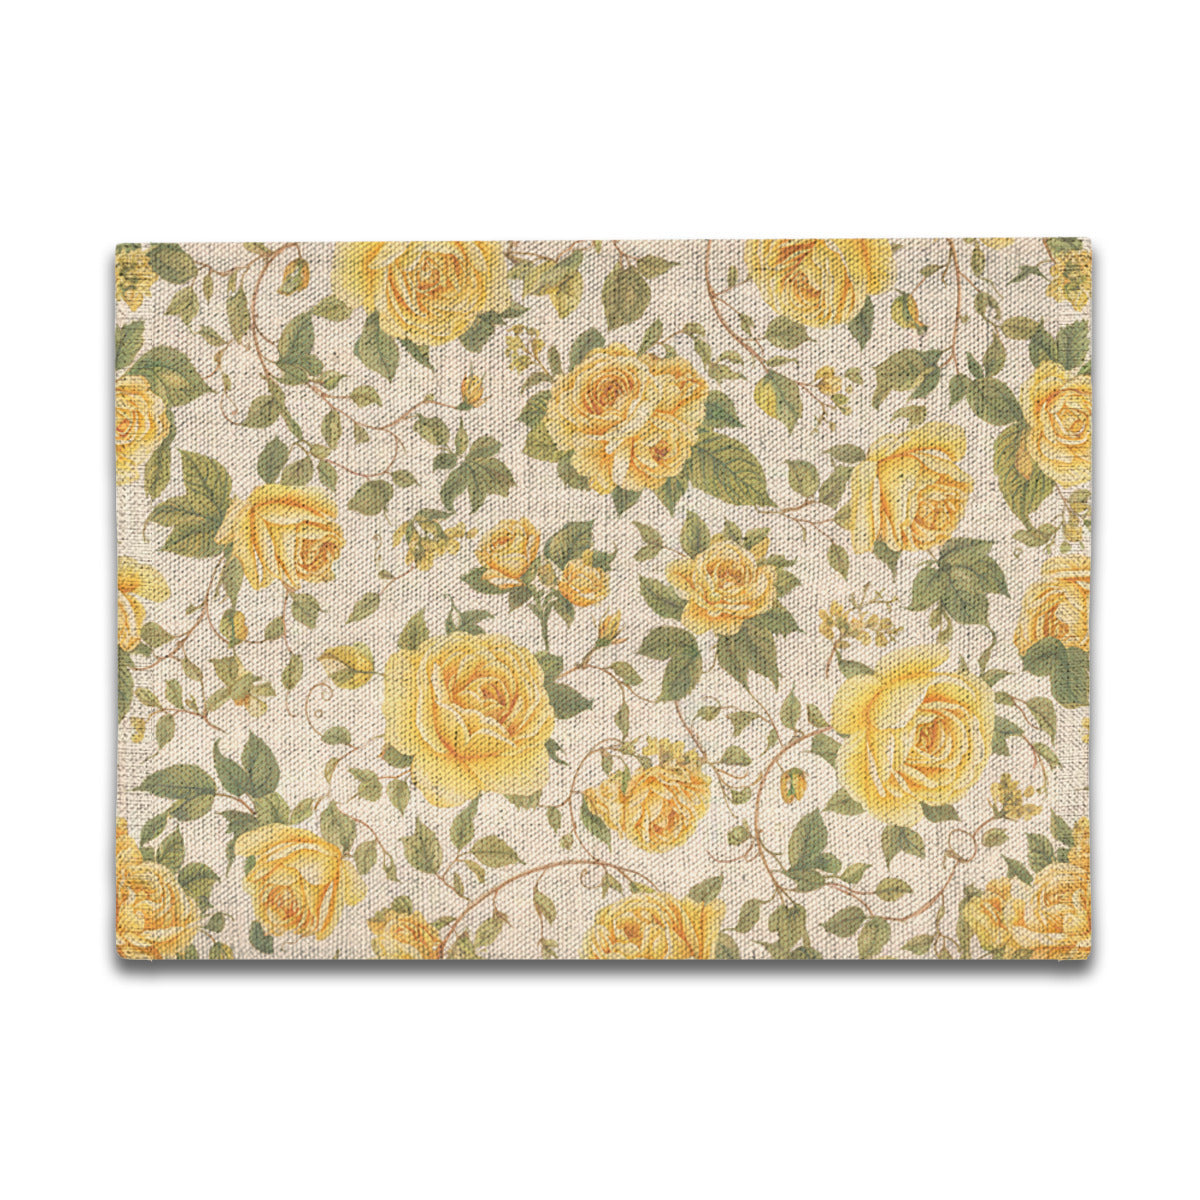 Vampire Art Retro Linen Placemats - Yellow Roses Floral